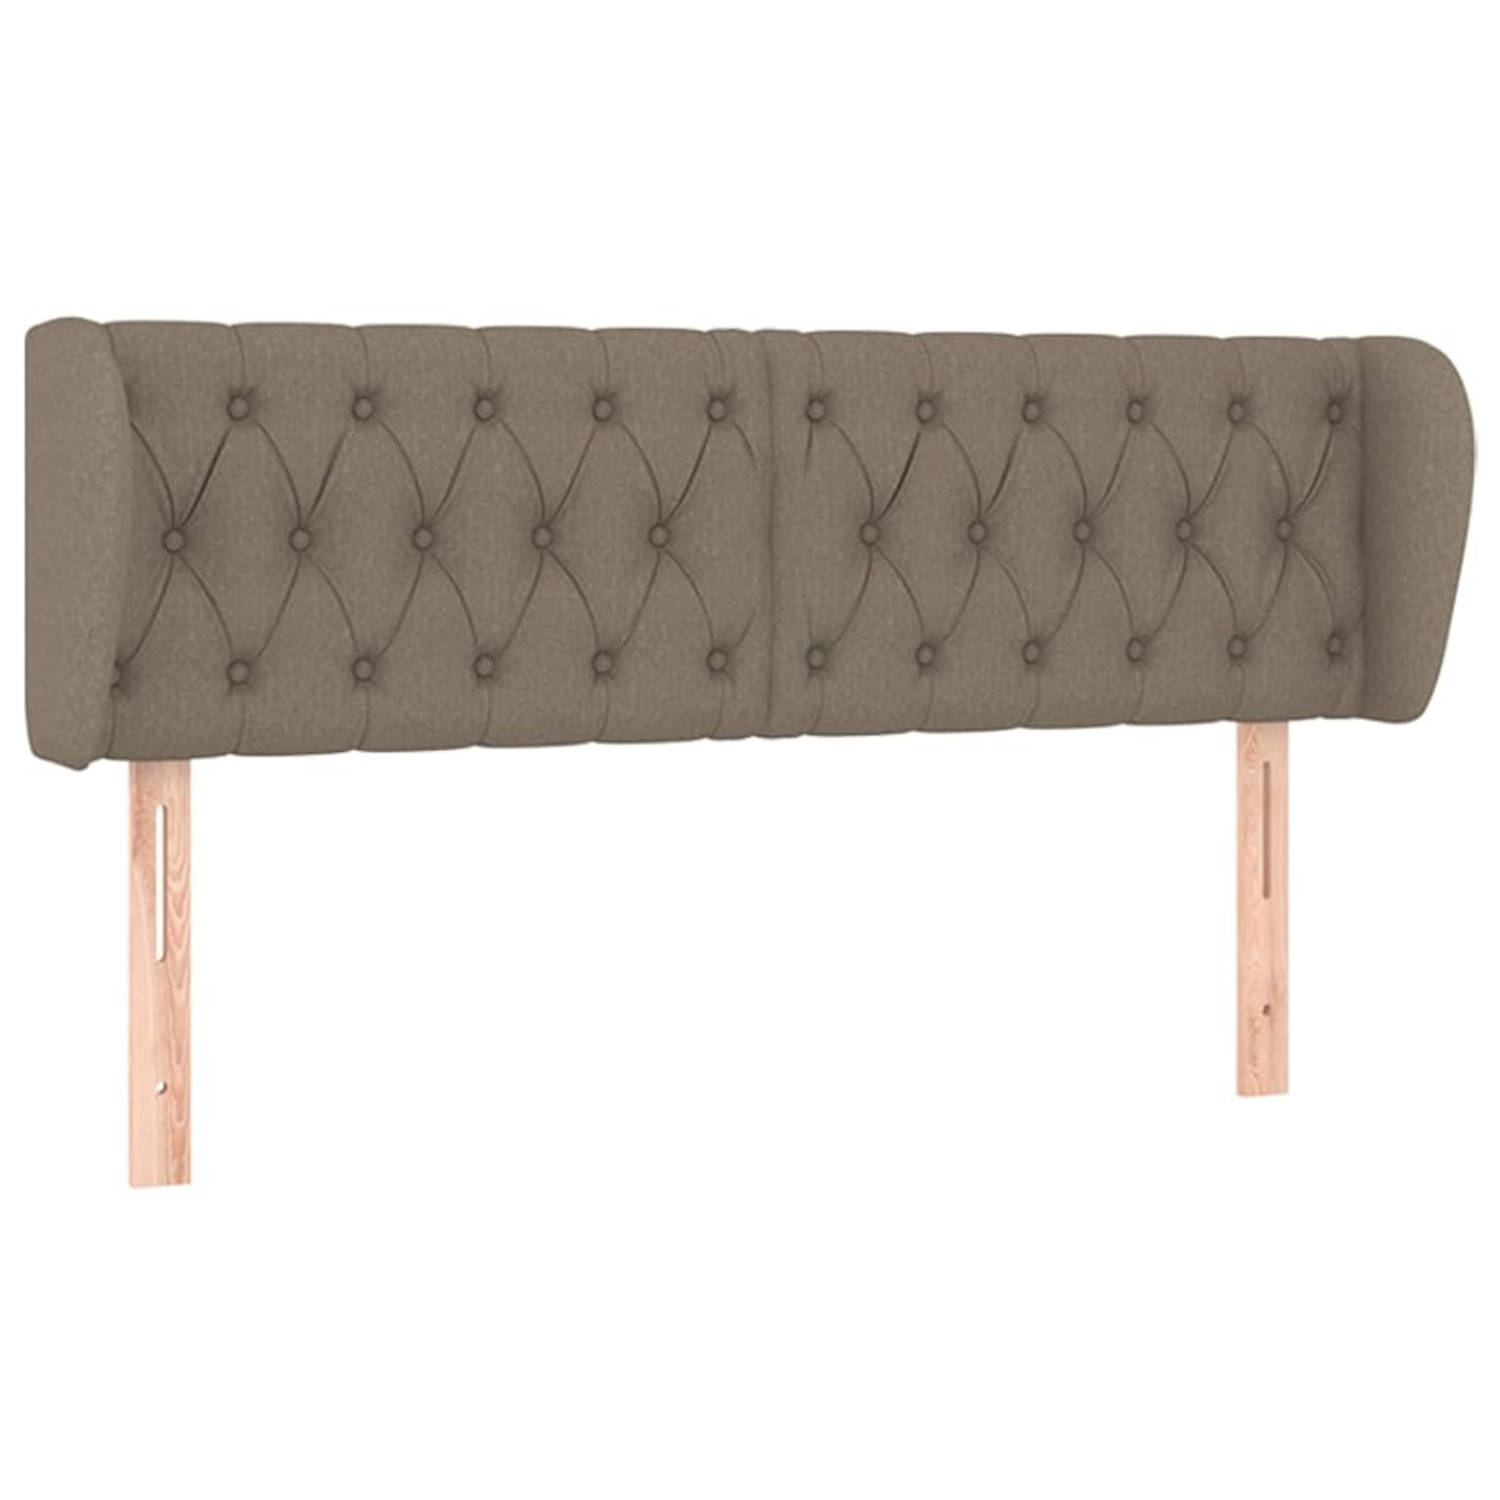 The Living Store Hoofdbord - Bedombouw Accessoires - 147 x 23 x 78/88 cm - Taupe